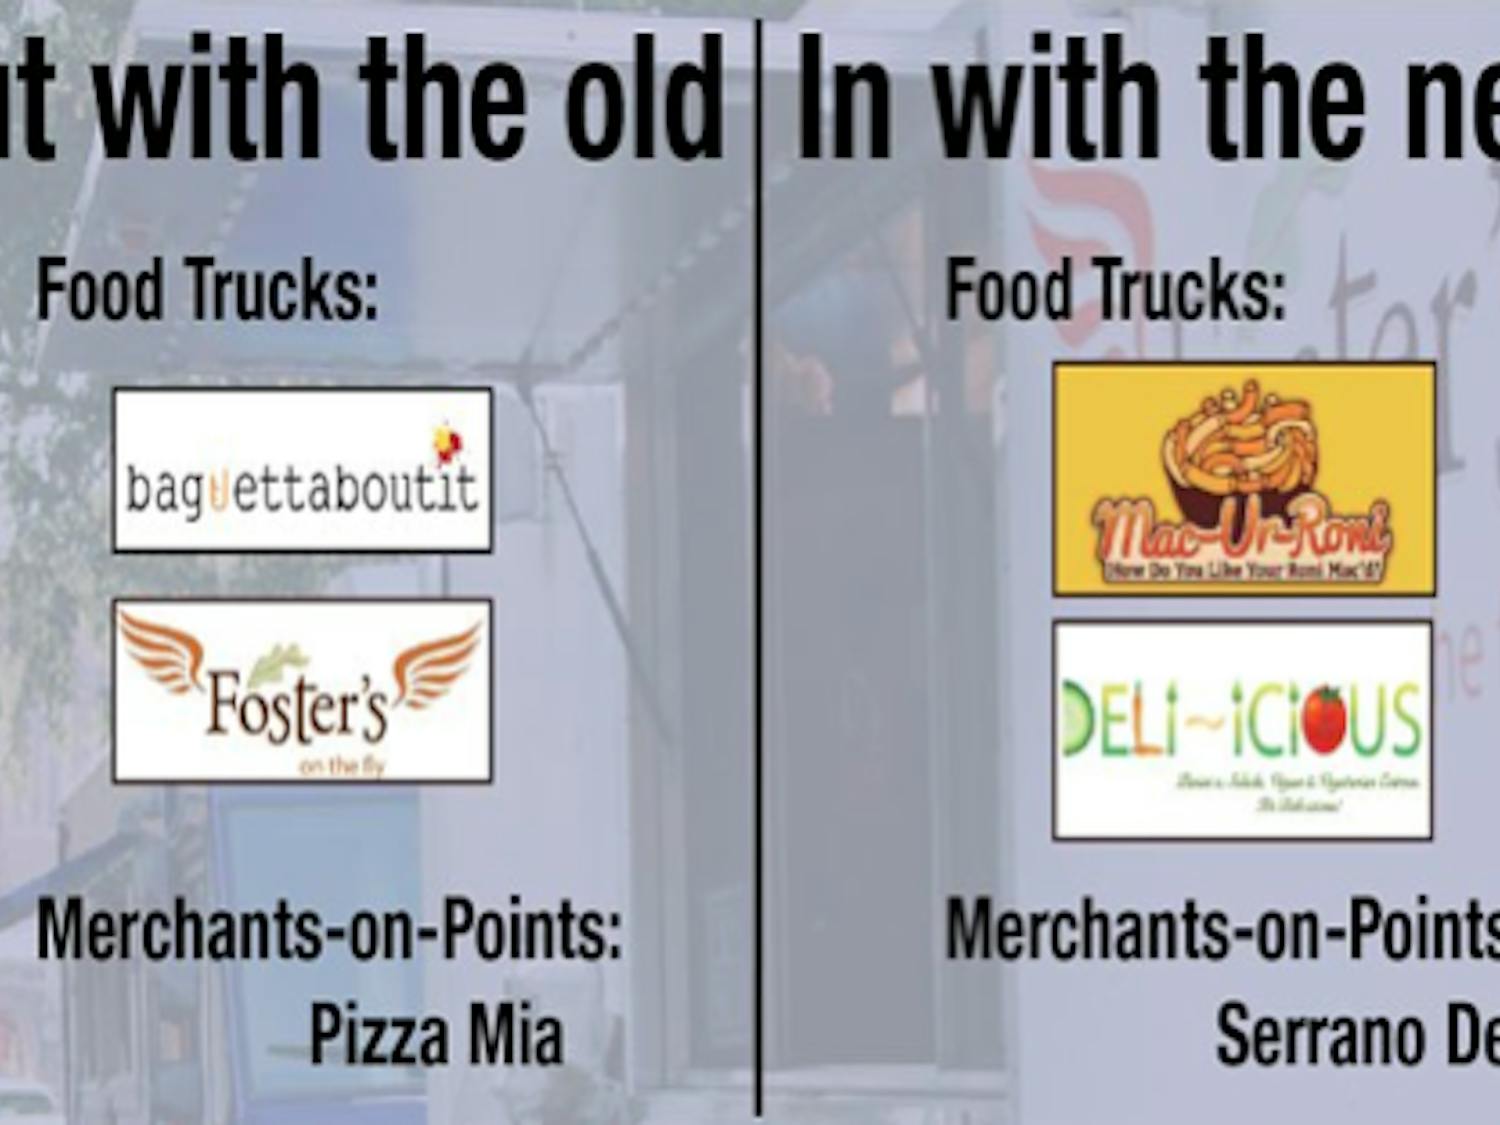 New food trucks Mac-ur-Roni and Deli-icious will rotate through the schedule in place of Baguettaboutit and Foster’s on the Fly.